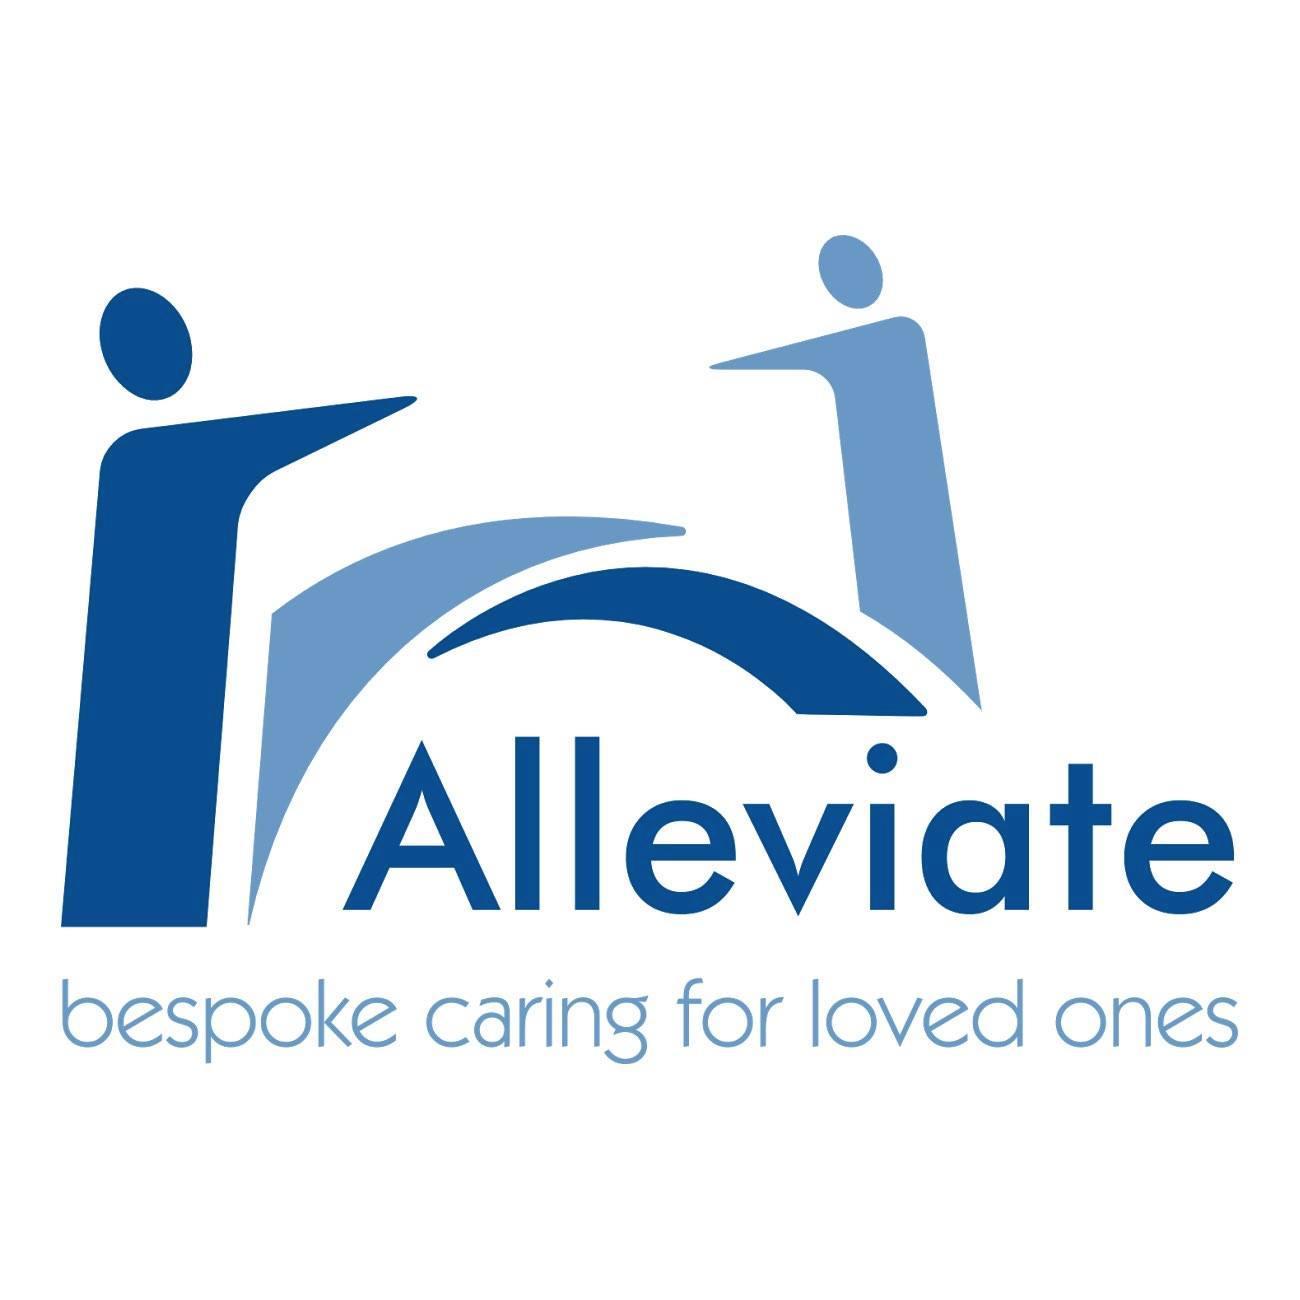 Alleviate Meaning and Definition